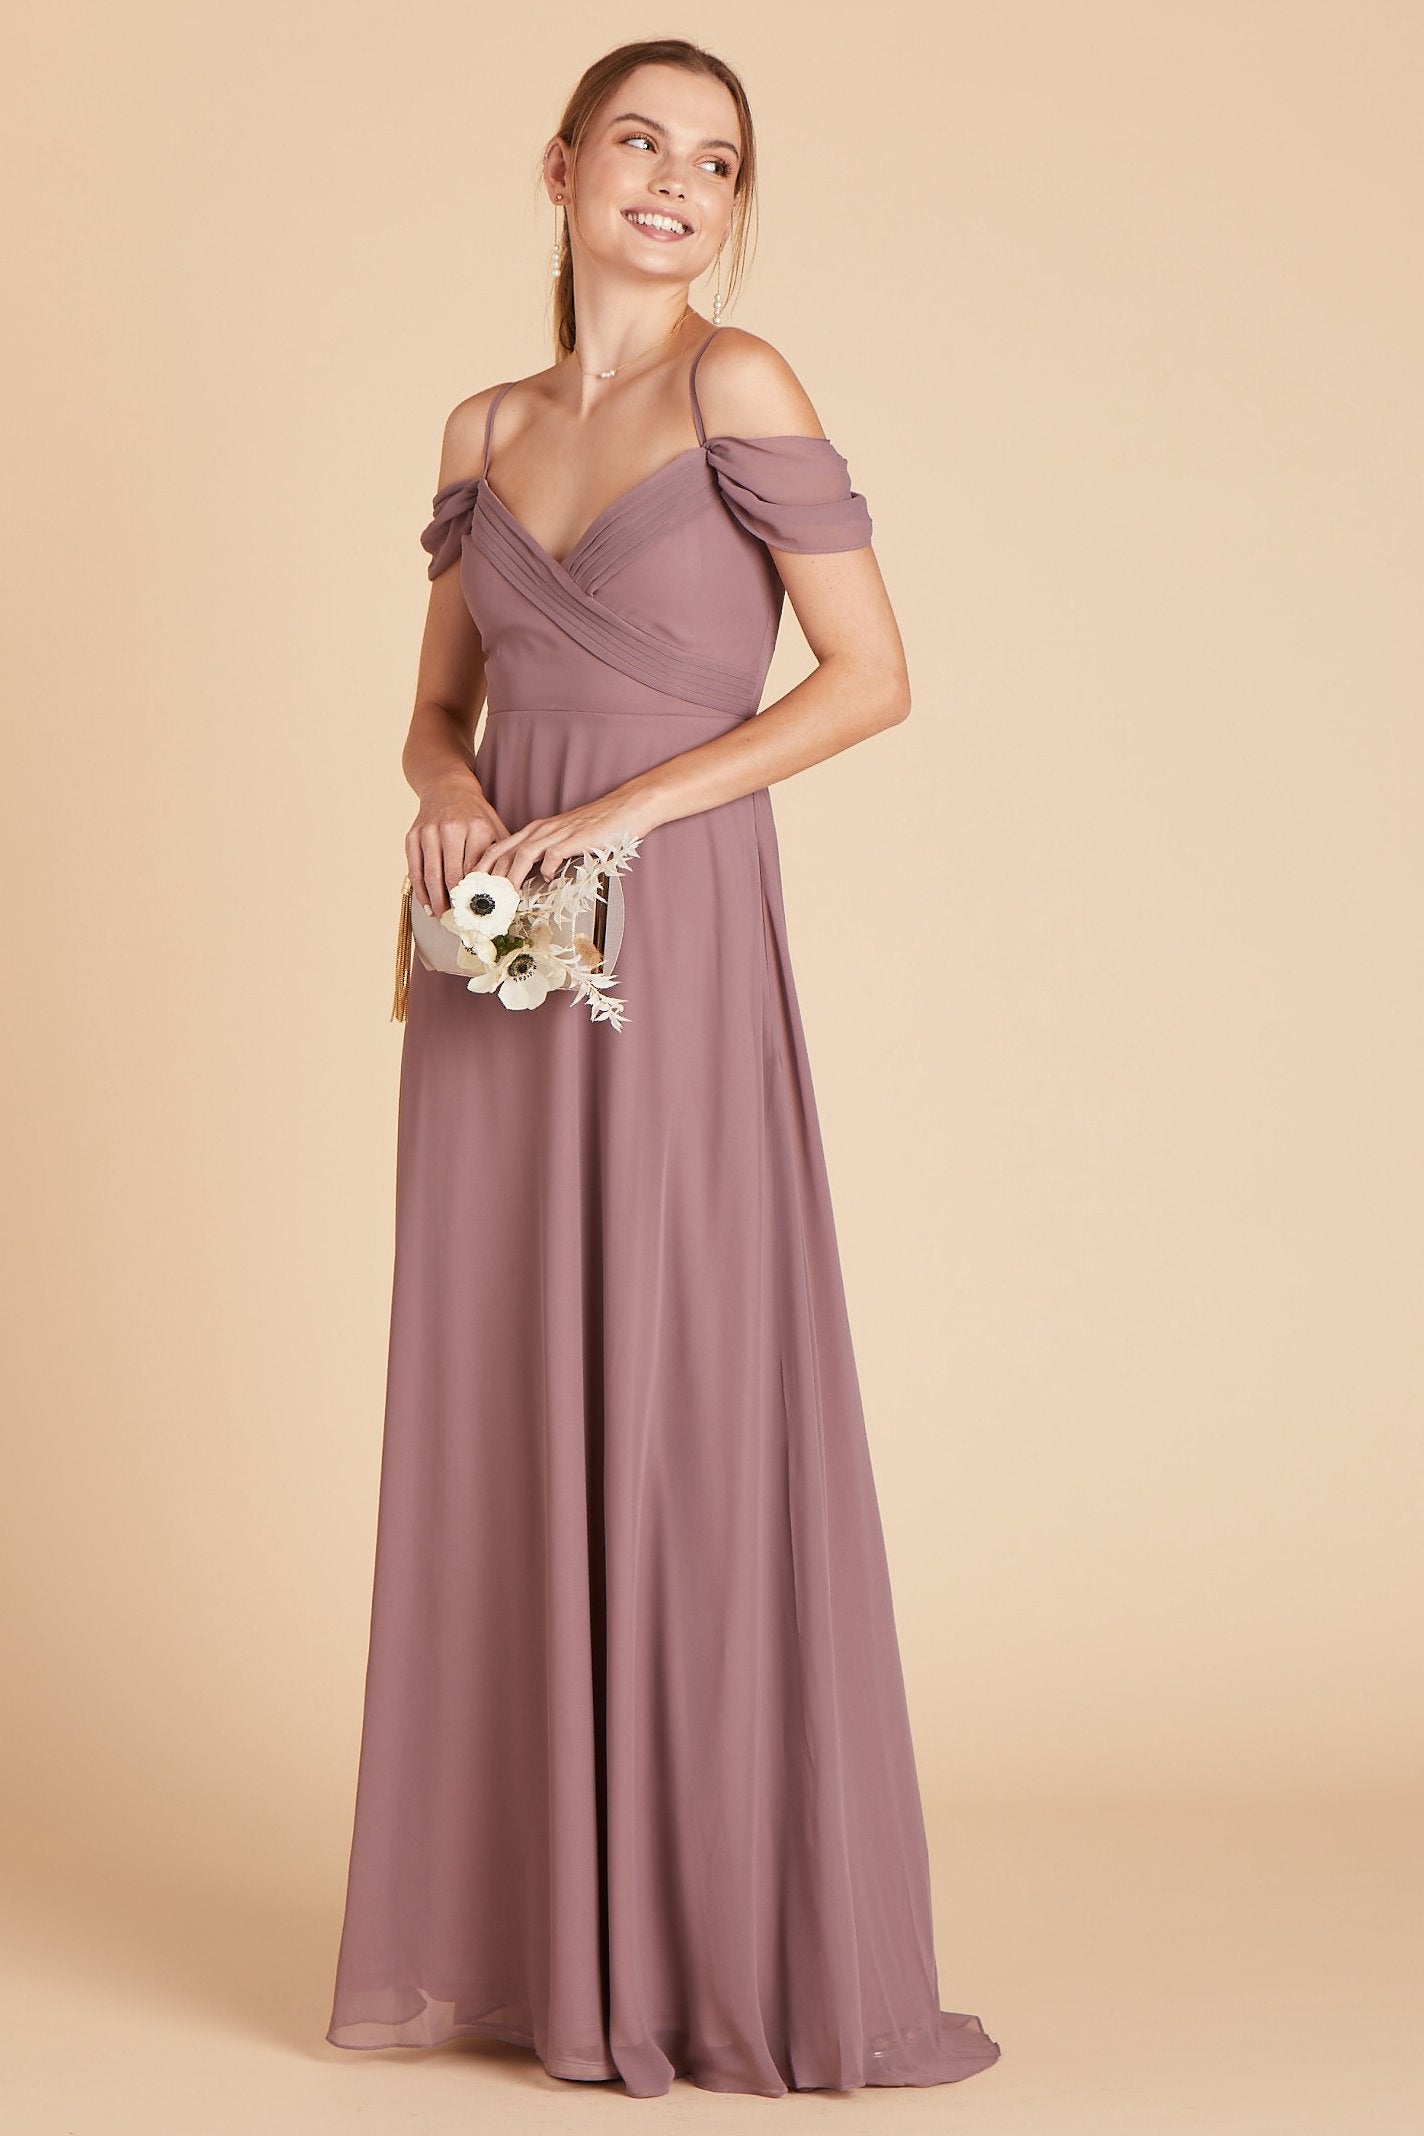 Spence convertible bridesmaid dress in dark mauve chiffon by Birdy Grey, front view